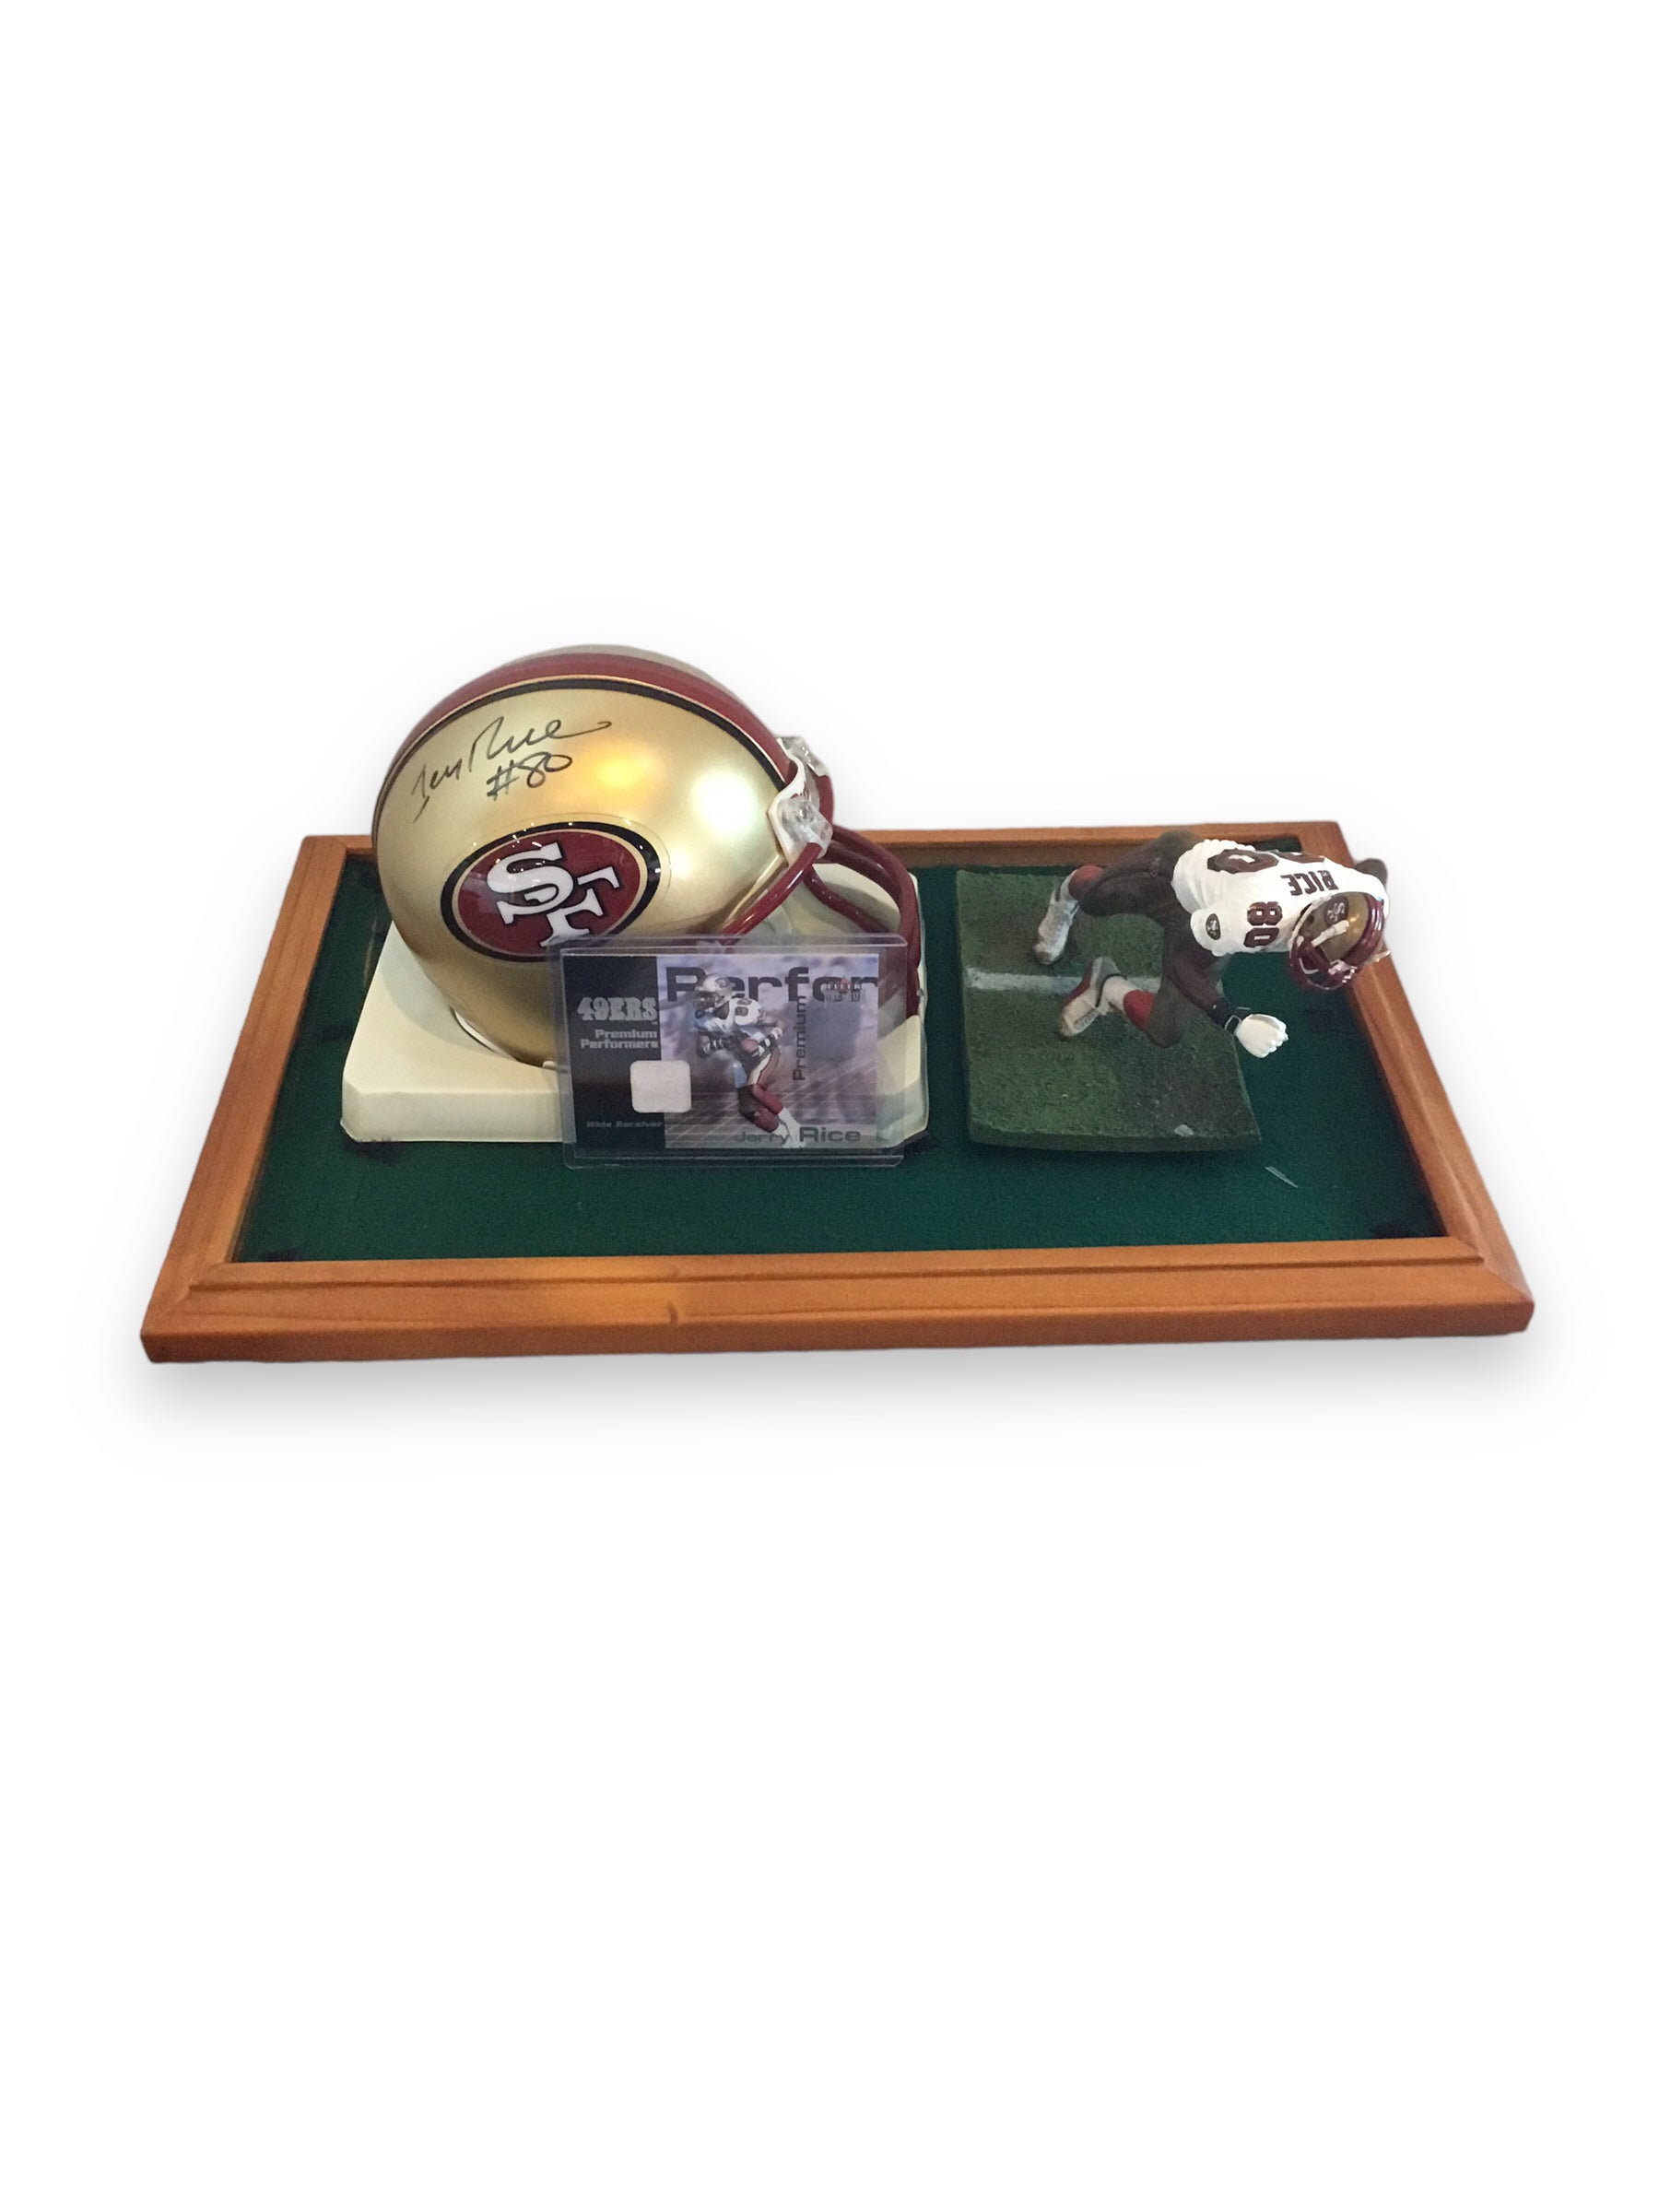 Jerry Rice 49ers Certified Authentic Autographed Mini-helmet Shadowbox